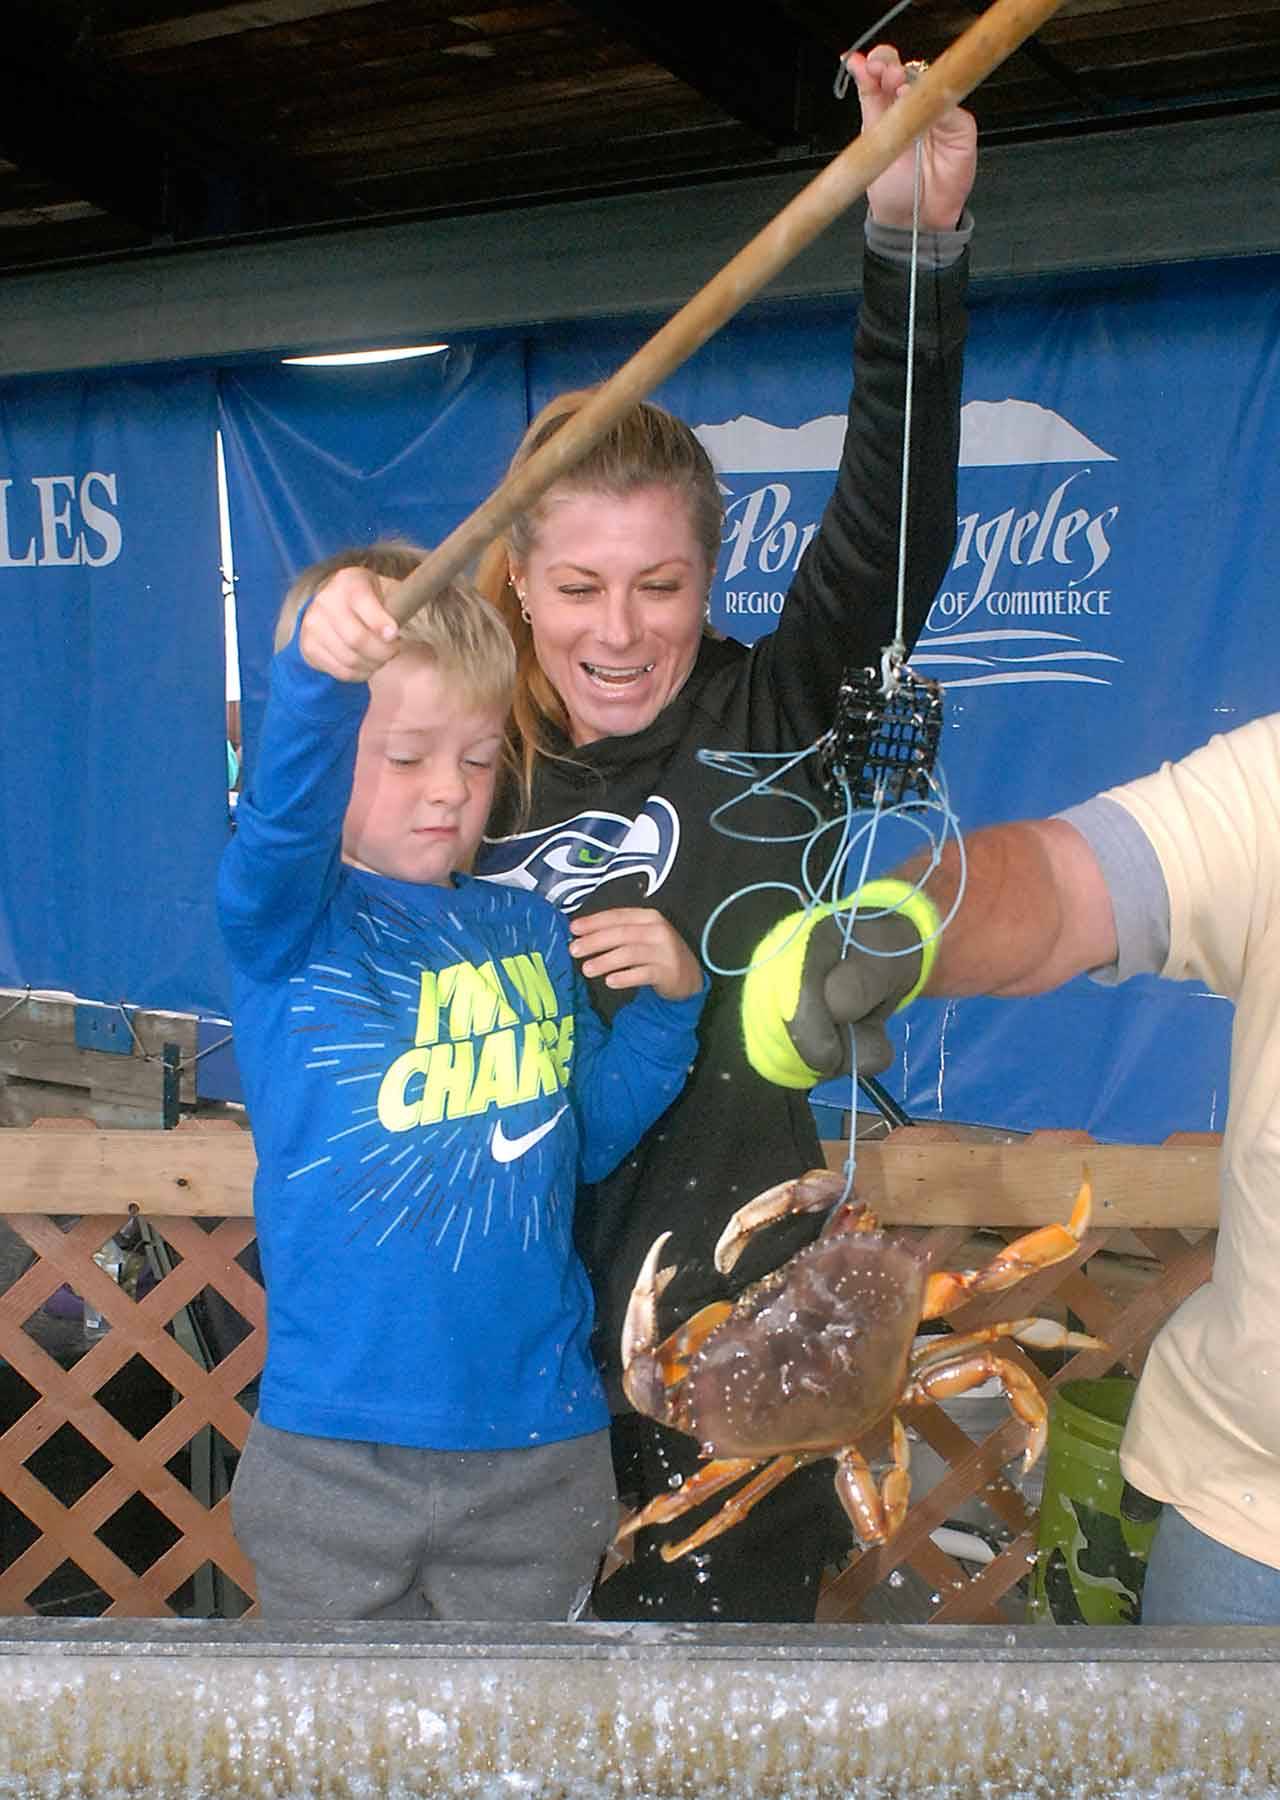 Marshall Springob, 11, winces as his mother, Angie Springob of Port Angeles, shows delight as the pair collaborated to catch a crab during the Dungness Crab & Seafood Festival crab derby Friday at Port Angeles City Pier. (Keith Thorpe/Peninsula Daily News)